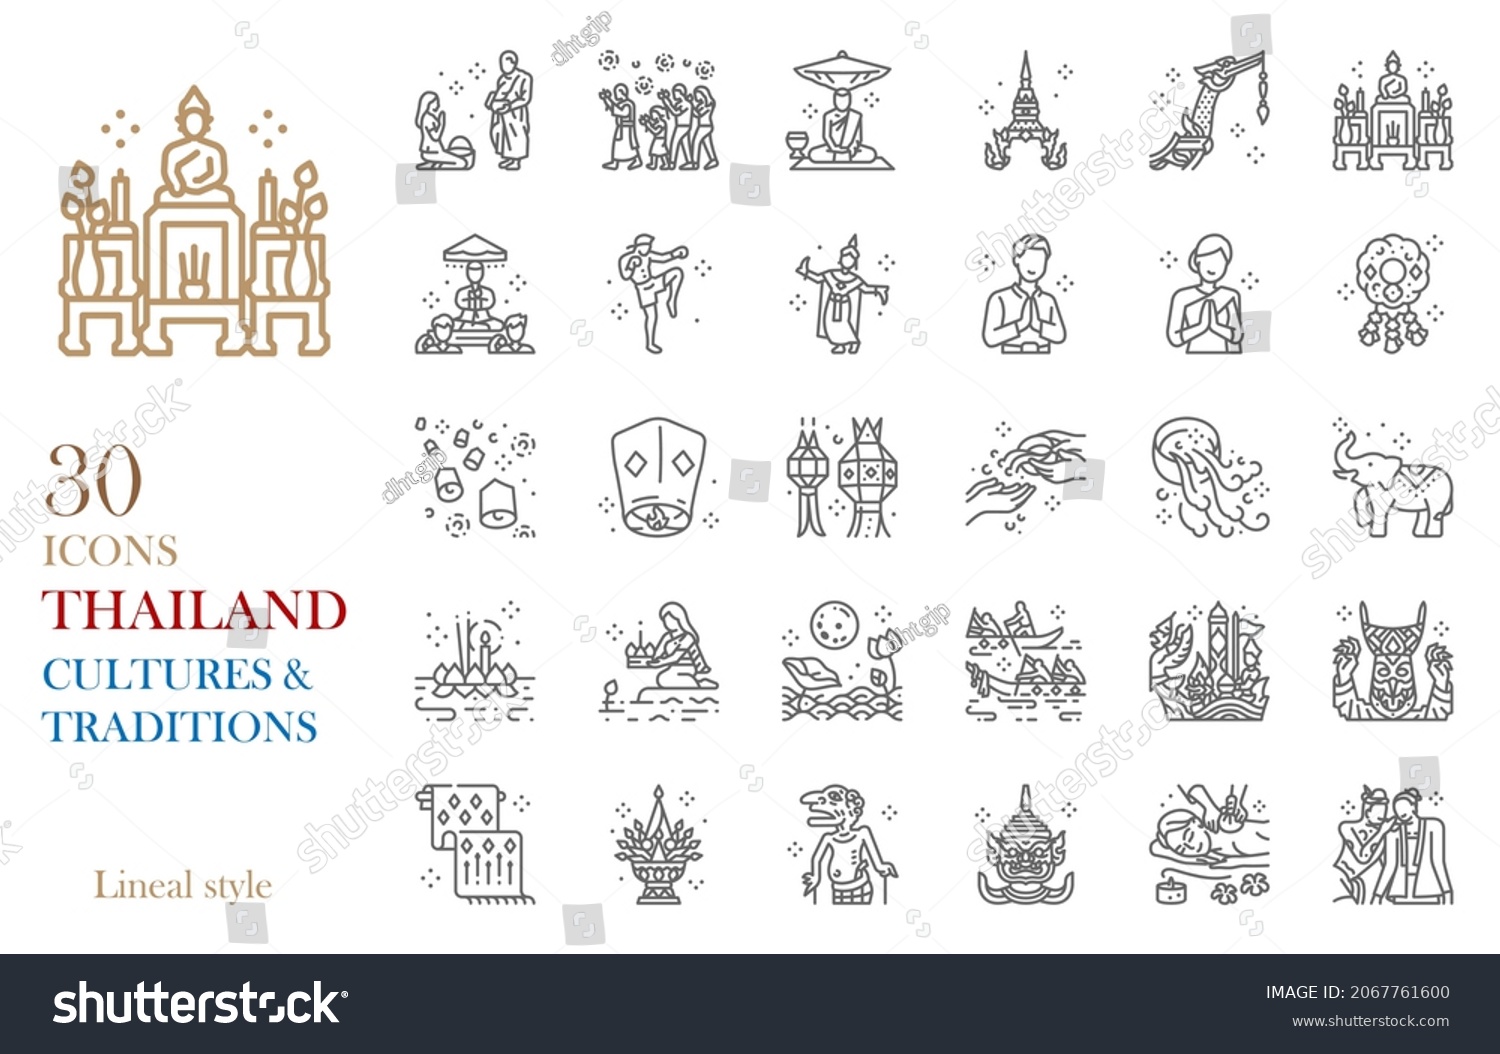 SVG of Thailand line icon set vector illustration in cultures,traditions,arts and charming lifestyle concept.Included Loi Krathong festival,monk ordination,buddhist day,Songkran festival,massage. svg